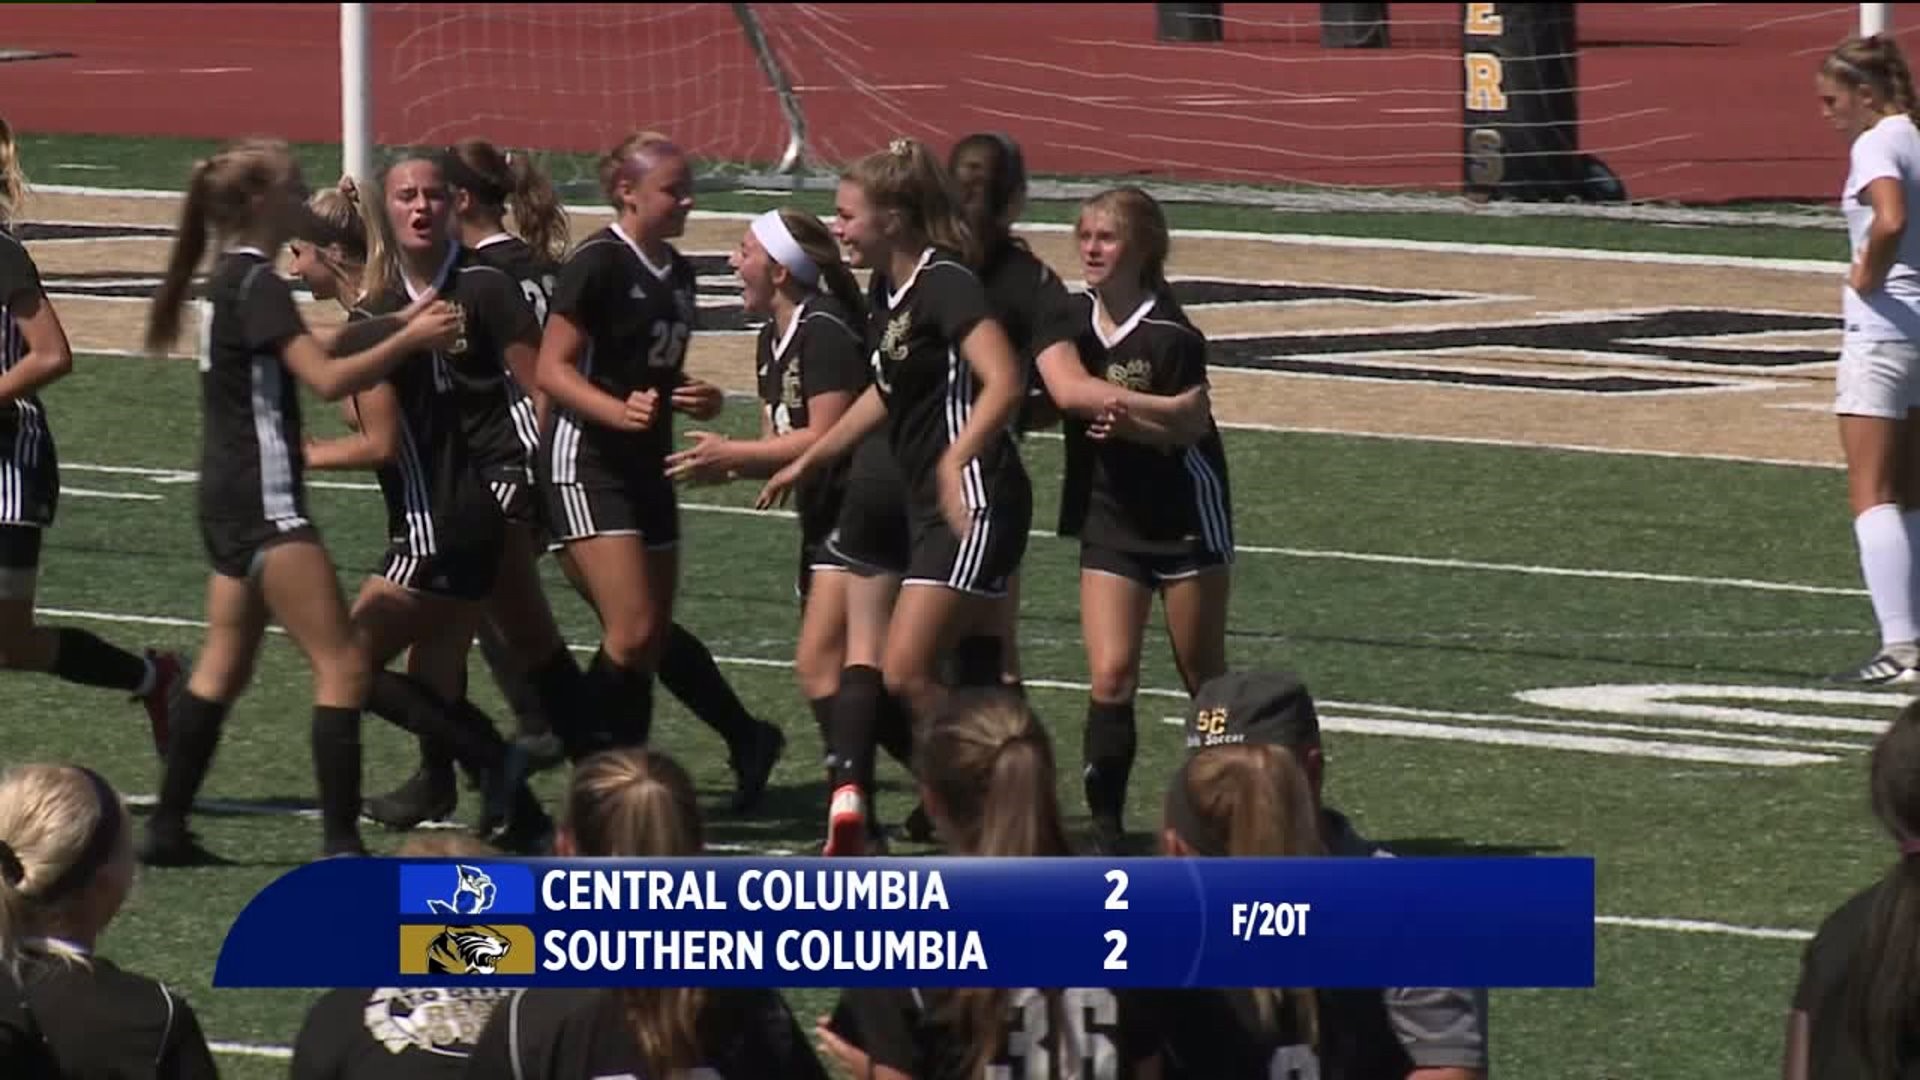 Central, Southern Columbia Tie 2-2 In Key Girls Soccer Game